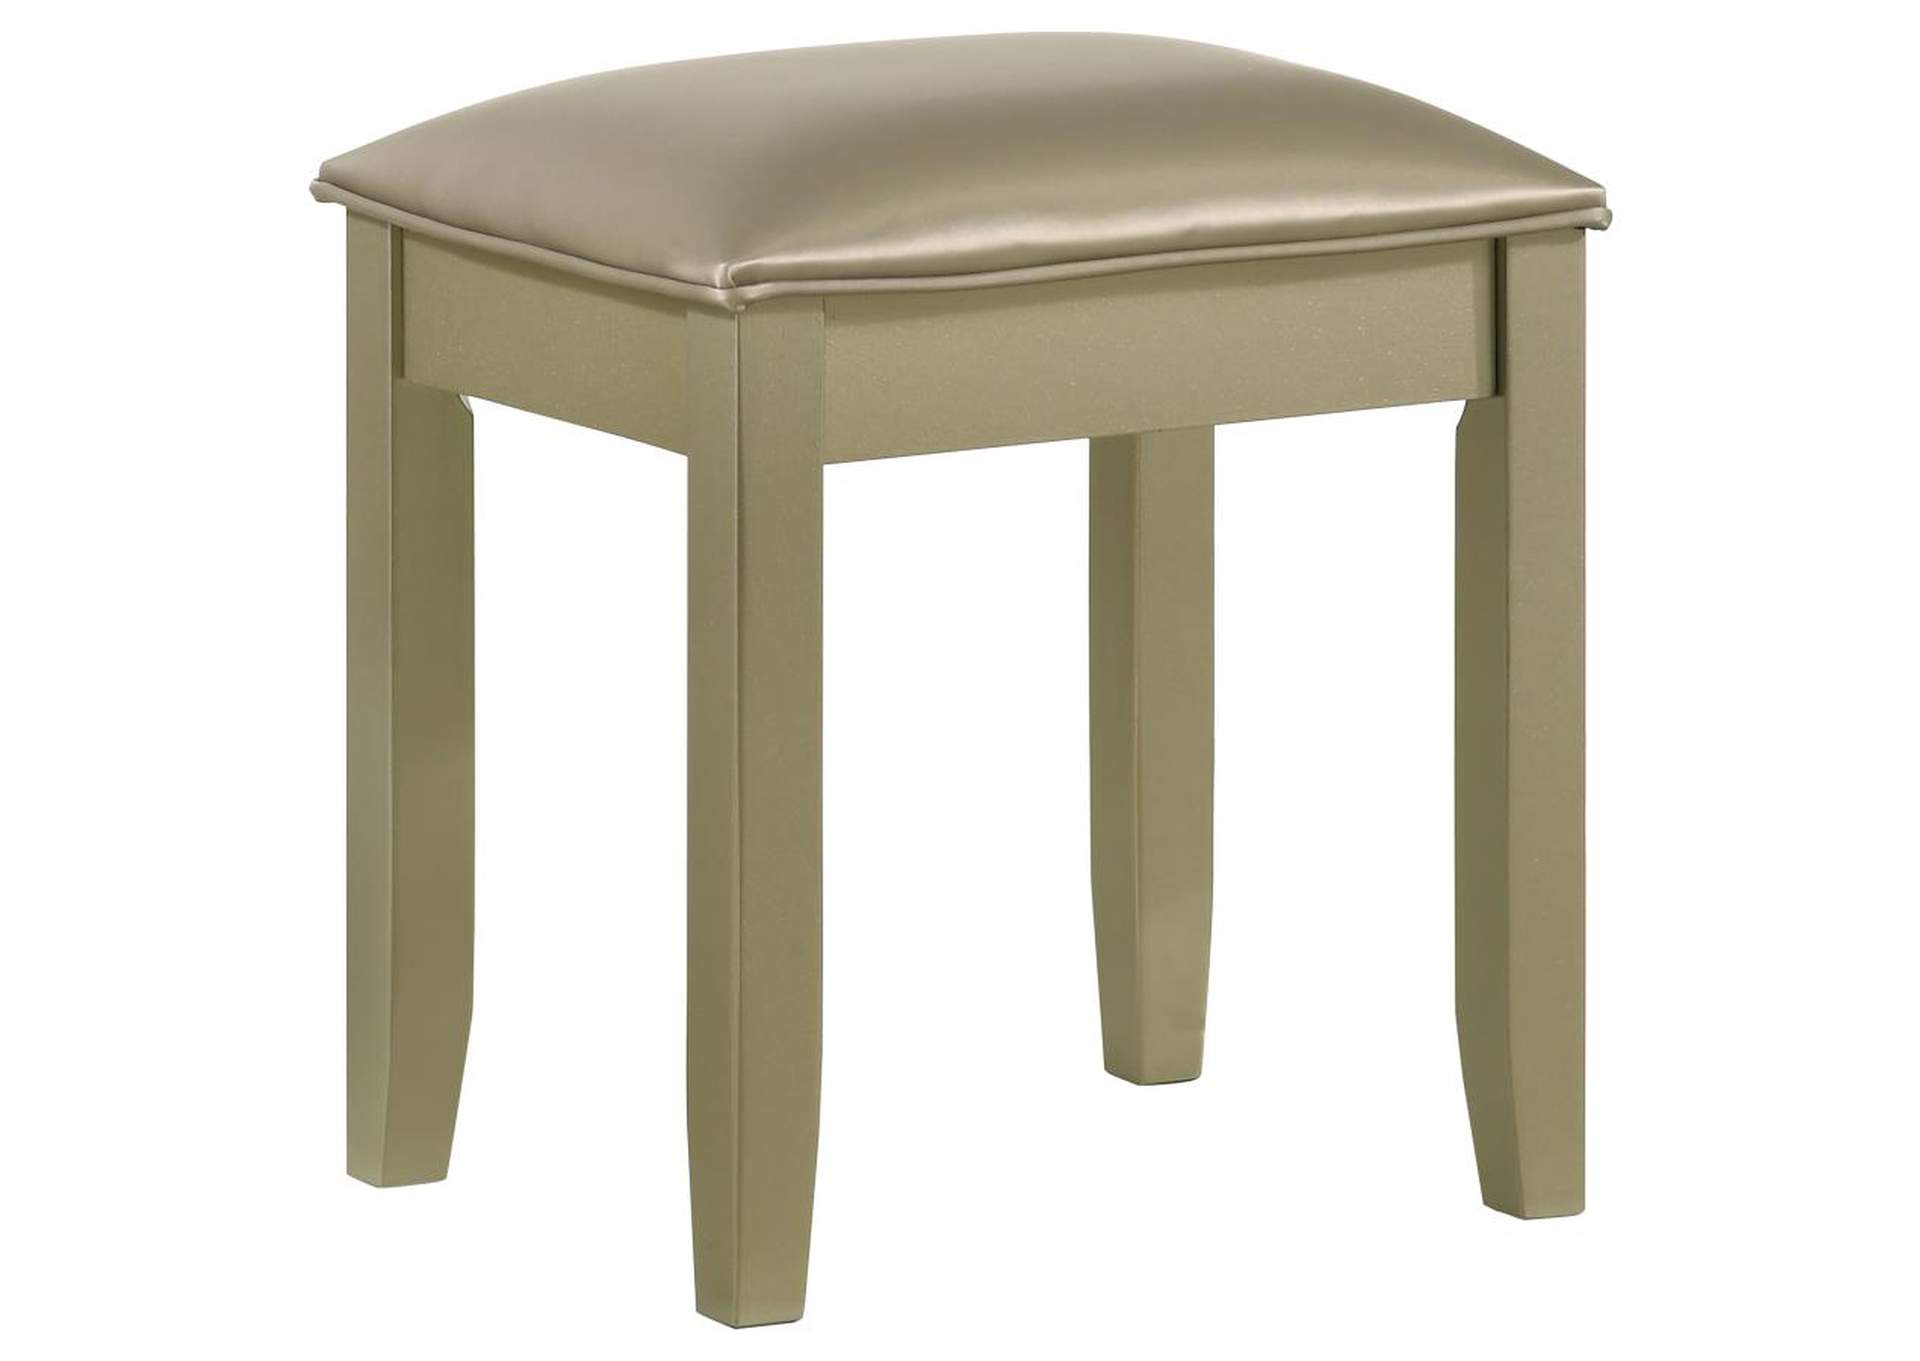 Beaumont Upholstered Vanity Stool Champagne Gold and Champagne,Coaster Furniture